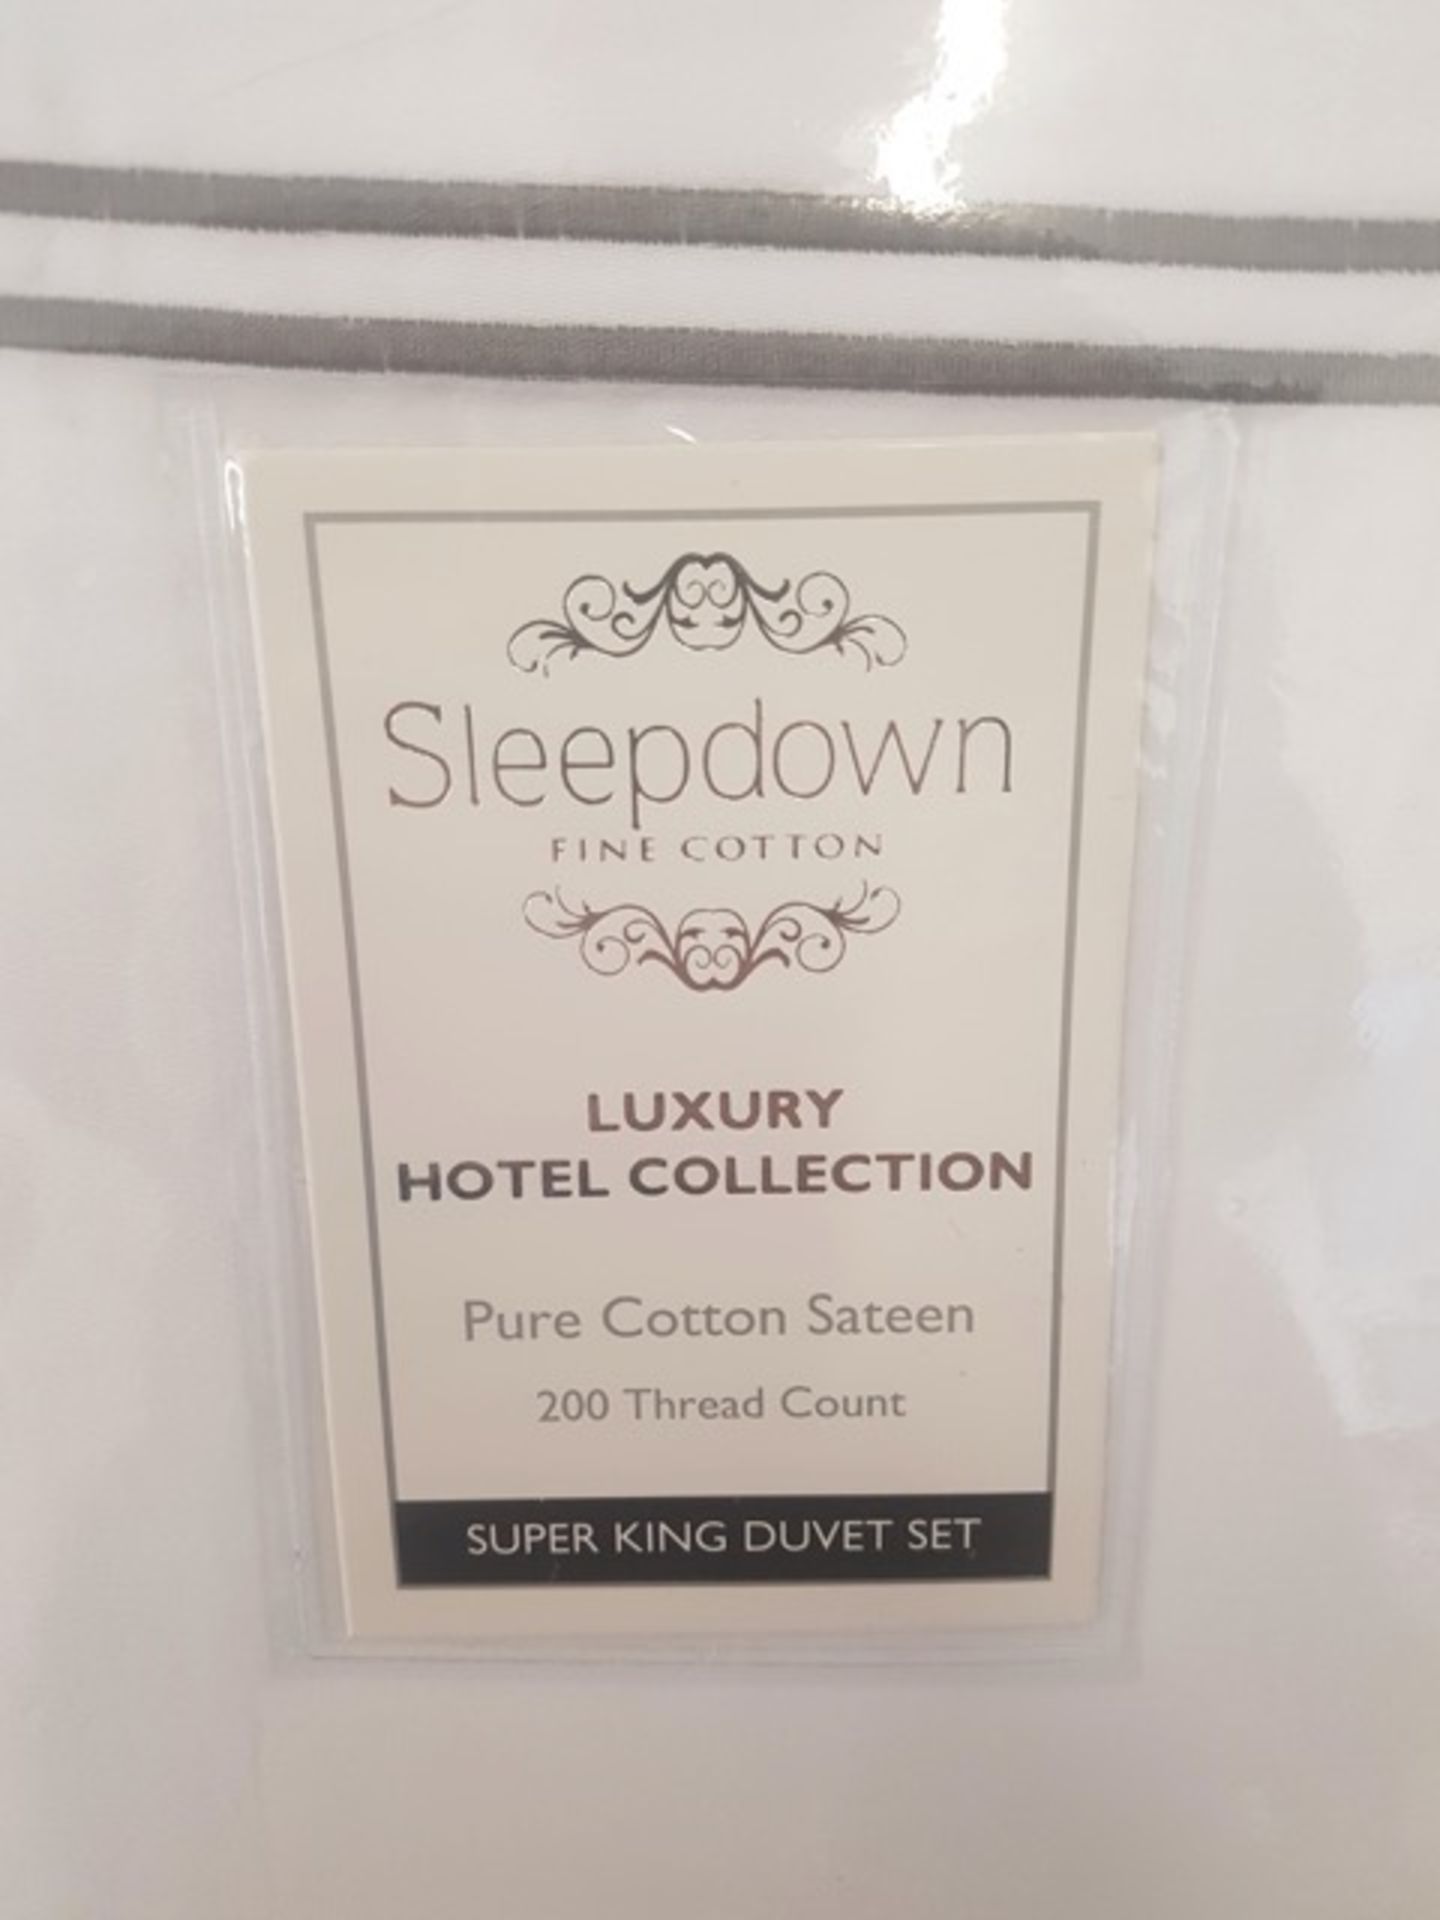 8 x Brand New Sleepdown Fine Cotton Luxury Hotel Collection 200 Thread Count - Pure Cotton Sateen - Image 3 of 5